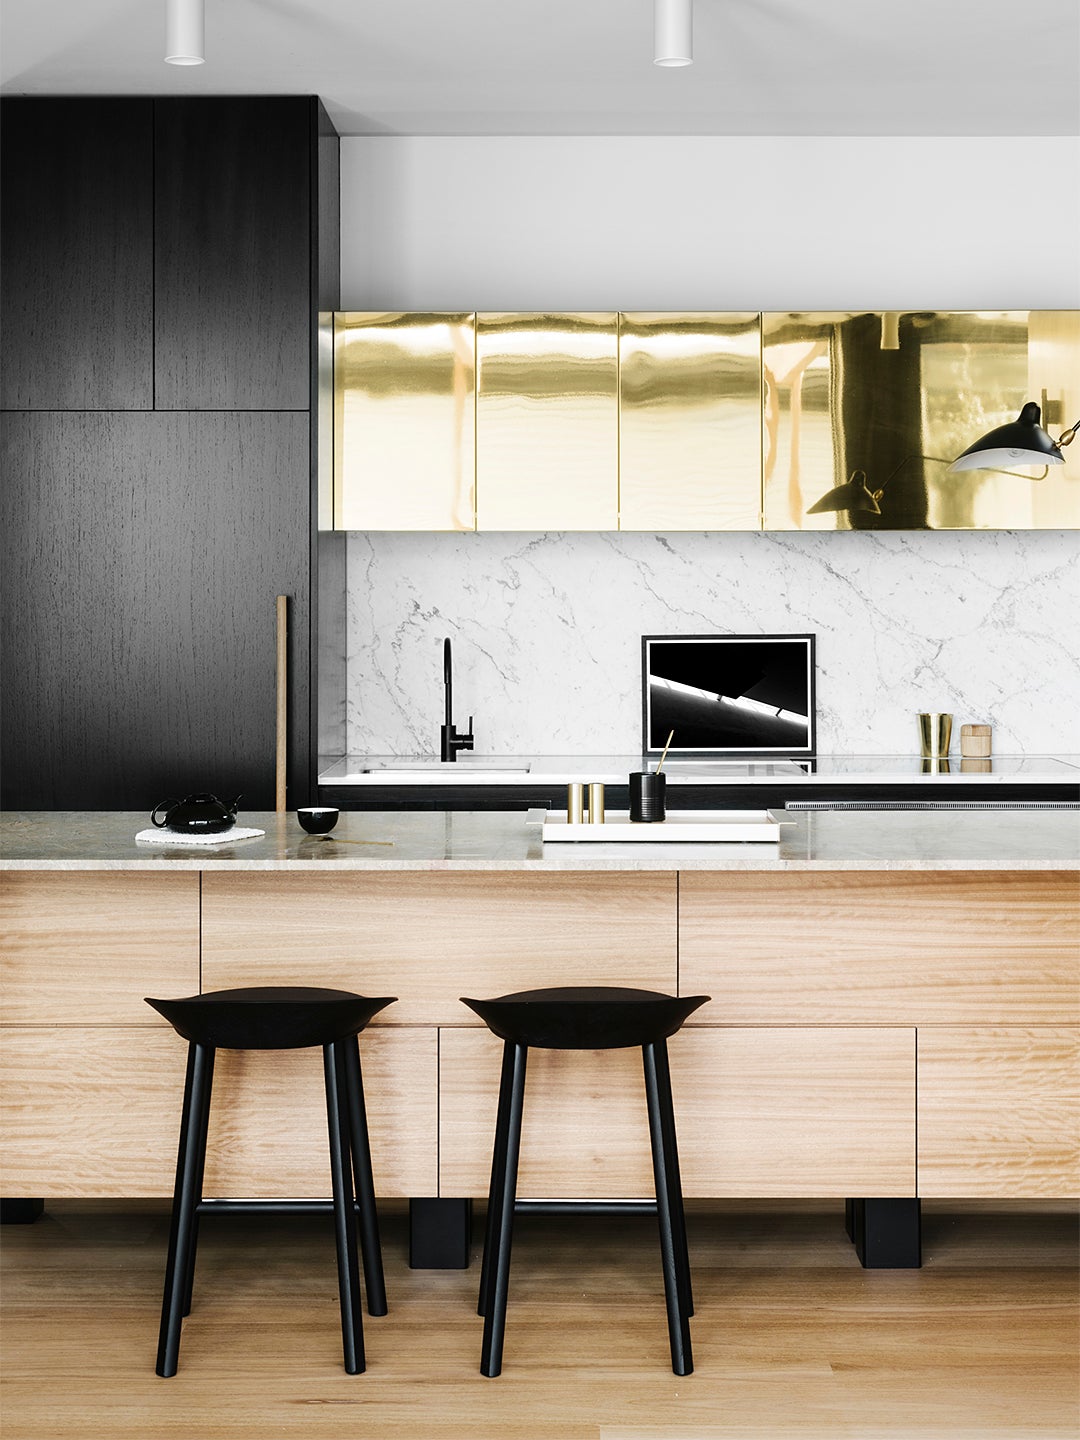 Polished or Patinaed, Brass Is Proving Its Staying Power